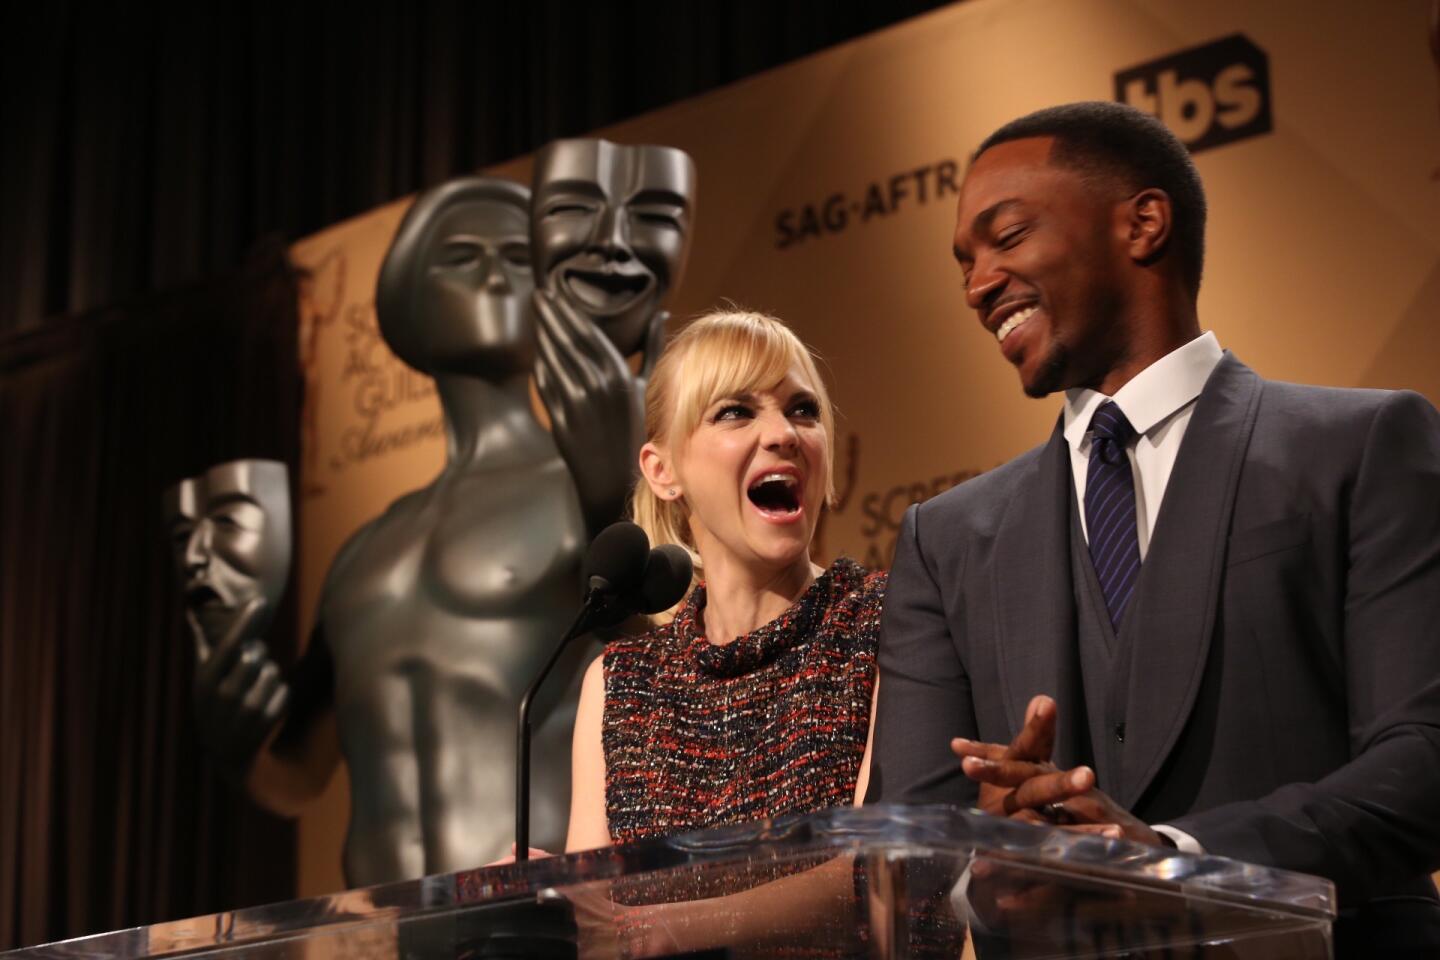 SAG noms announced by Anna Faris and Anthony Mackie